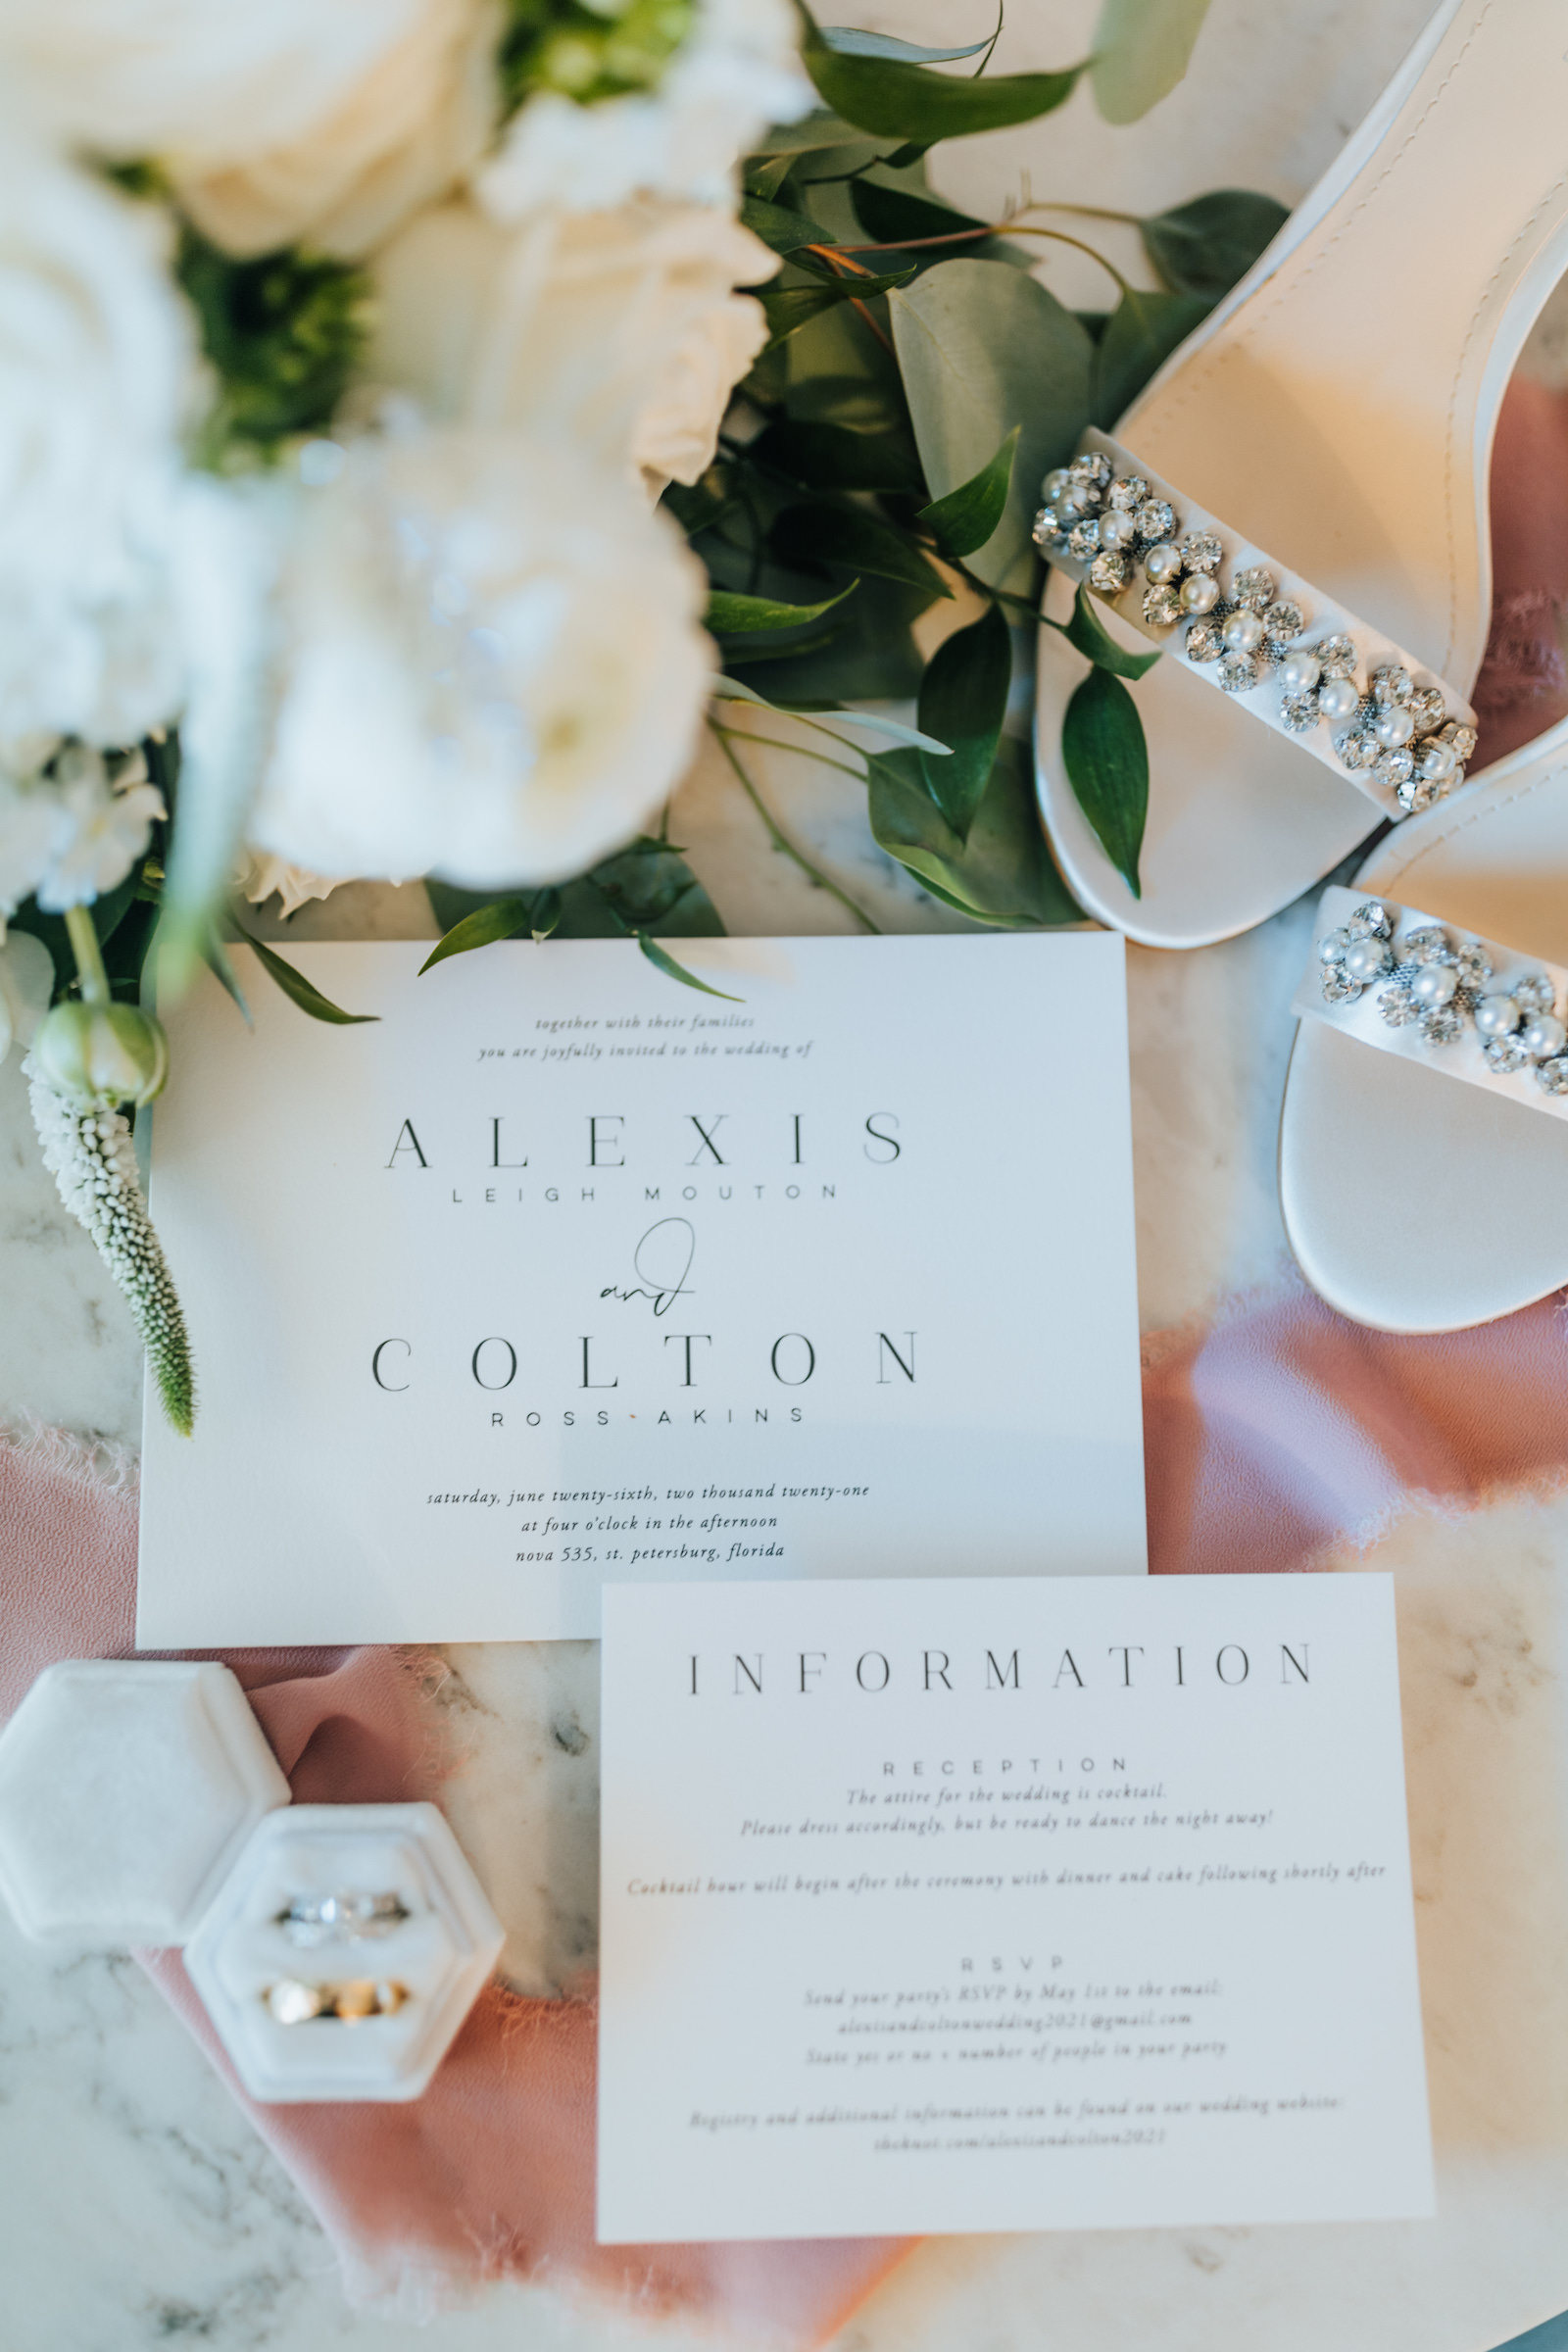 Classic White Wedding Invitations | Open Toed Sandal Wedding Shoes with Jewels